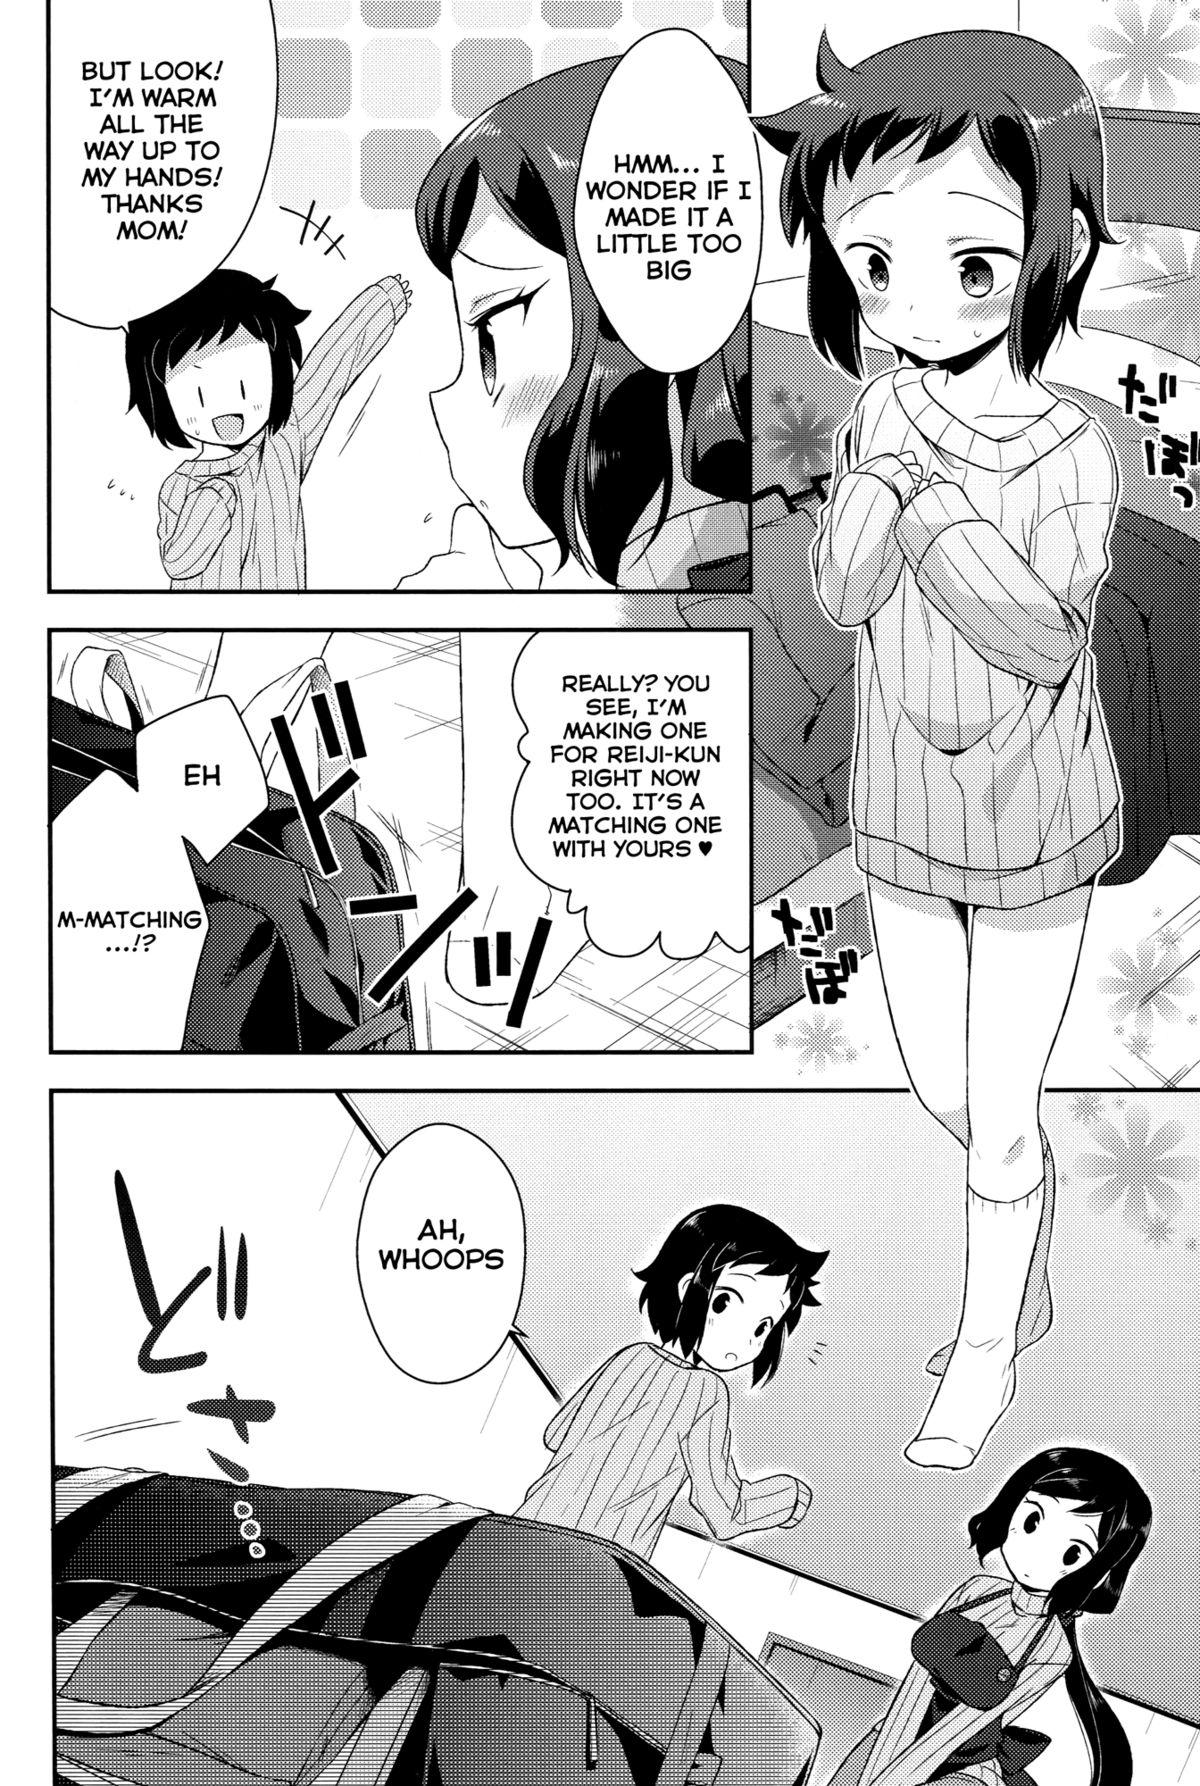 Old Vs Young Mama Shiyo! - Gundam build fighters Gorgeous - Page 7